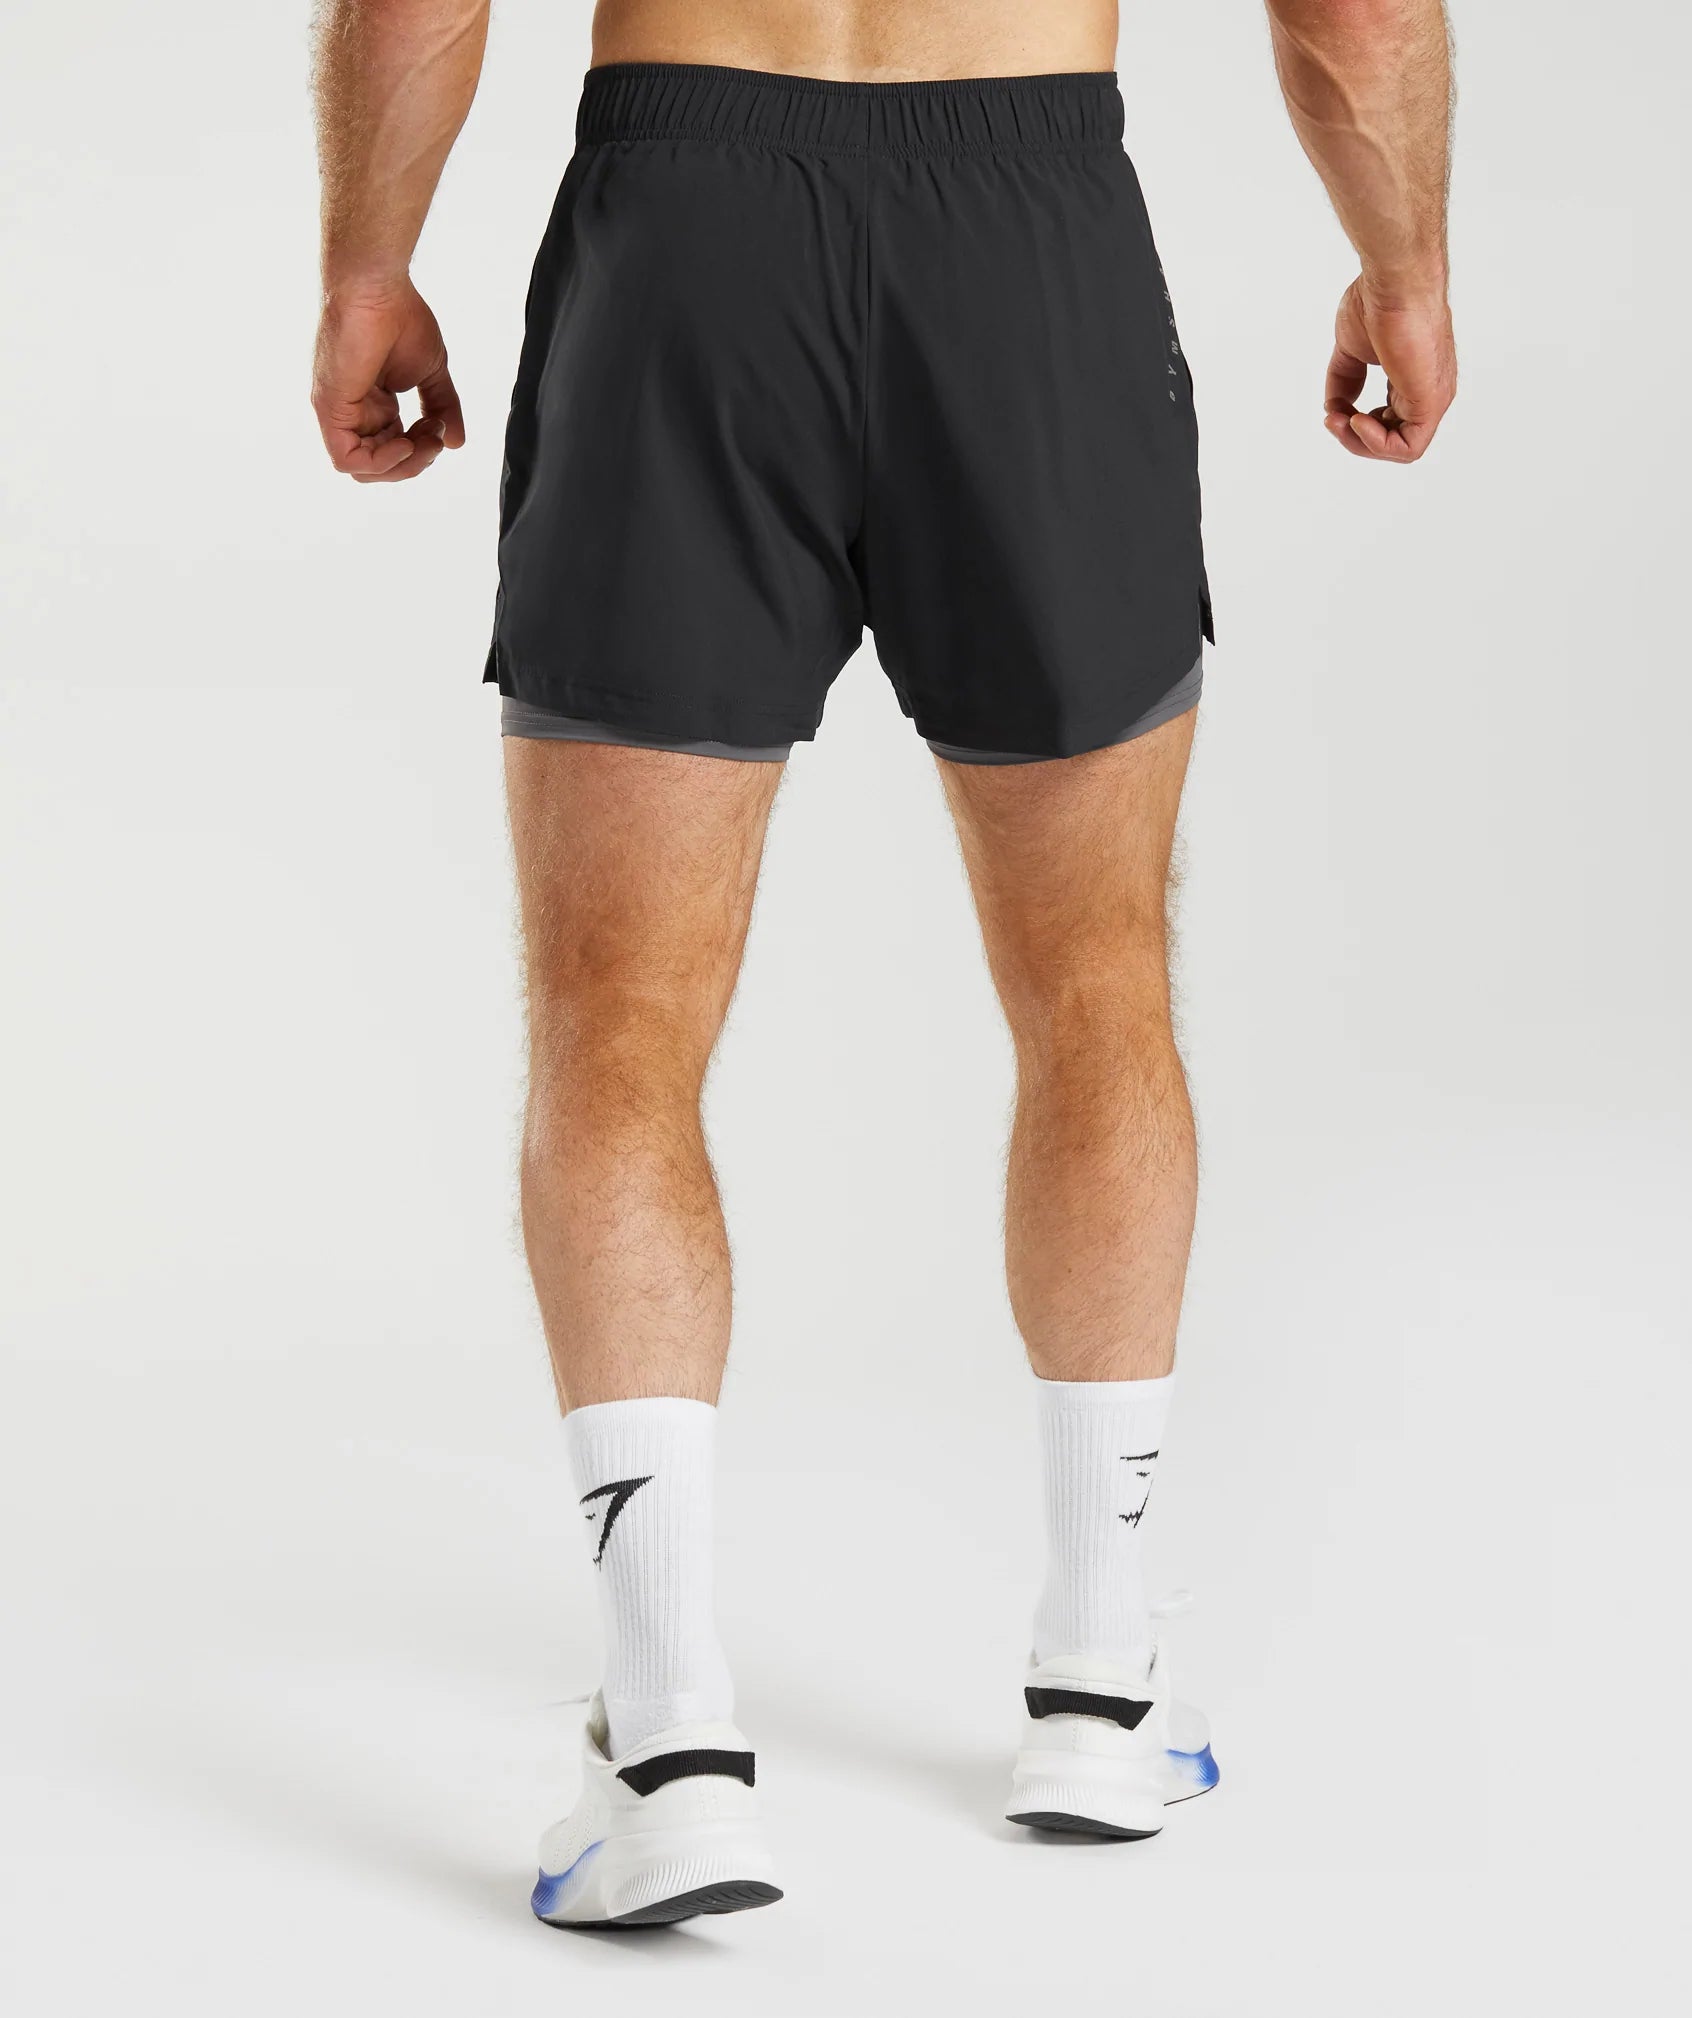 Mens Mesh Shorts with Pockets for Football, Running & Training - Battle  Sports